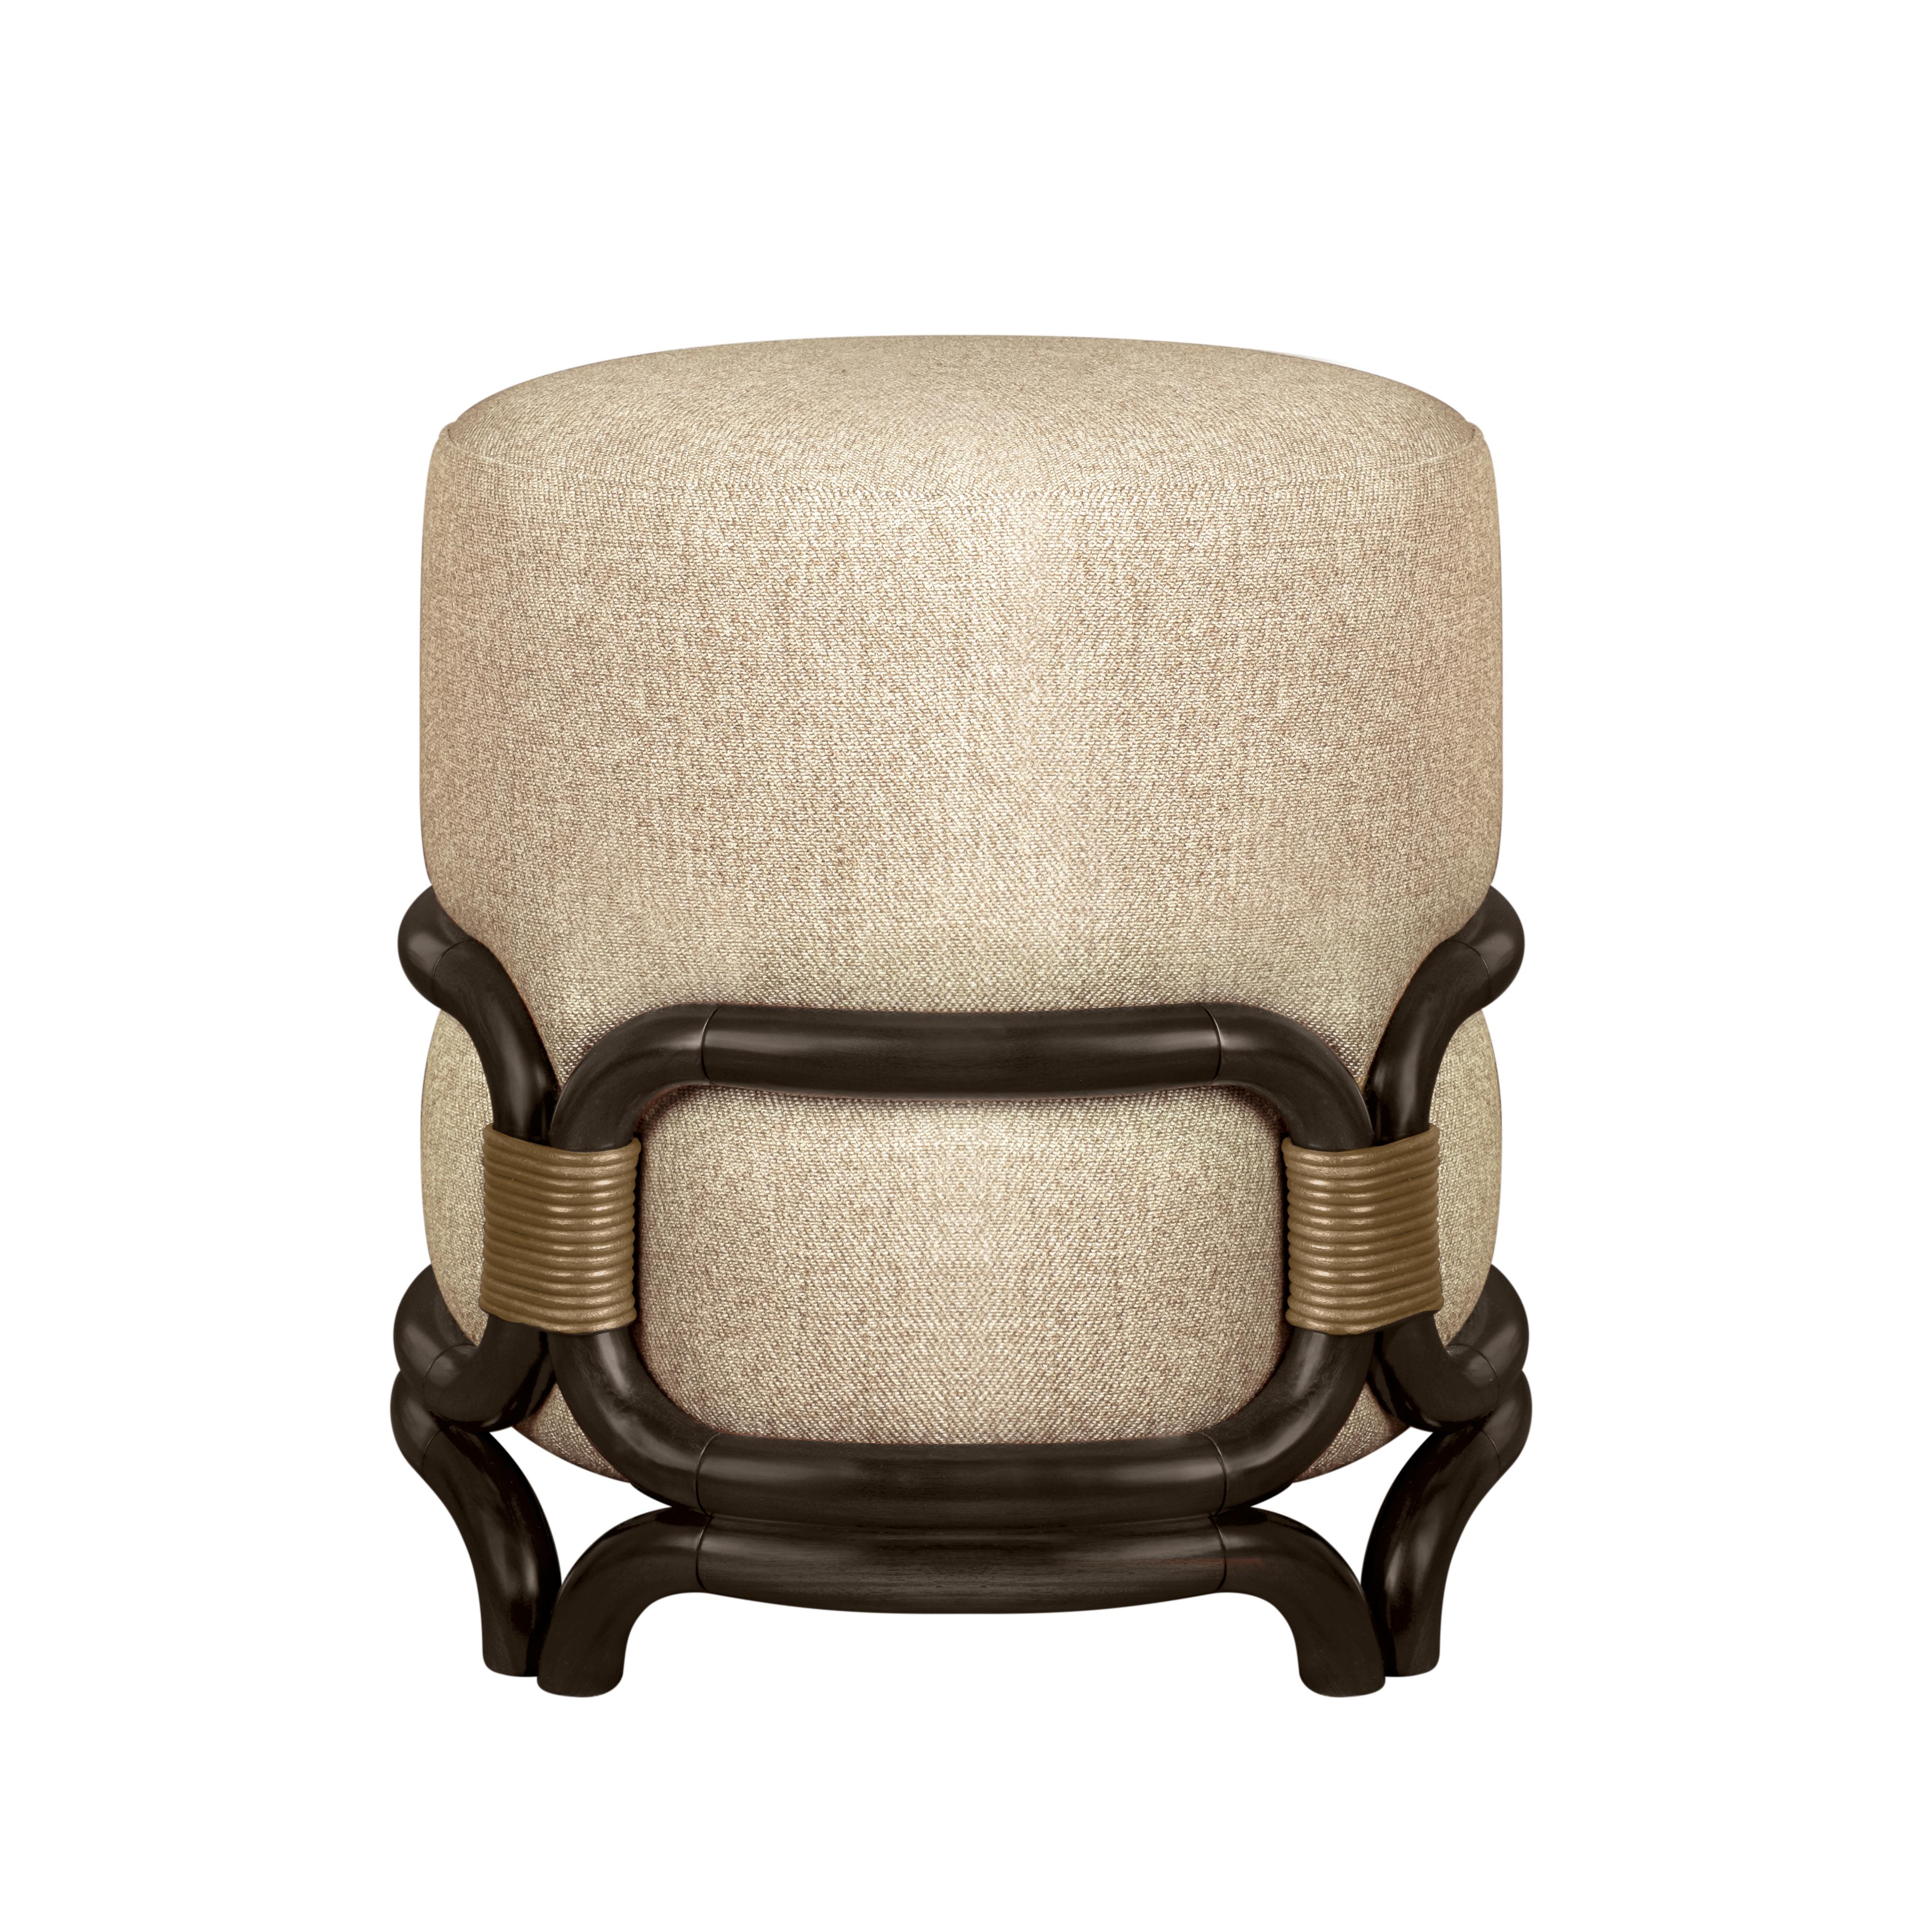 Contemporary 21st Century Stefan Stool Walnut Wood Linen Leather by Wood Tailors Club For Sale